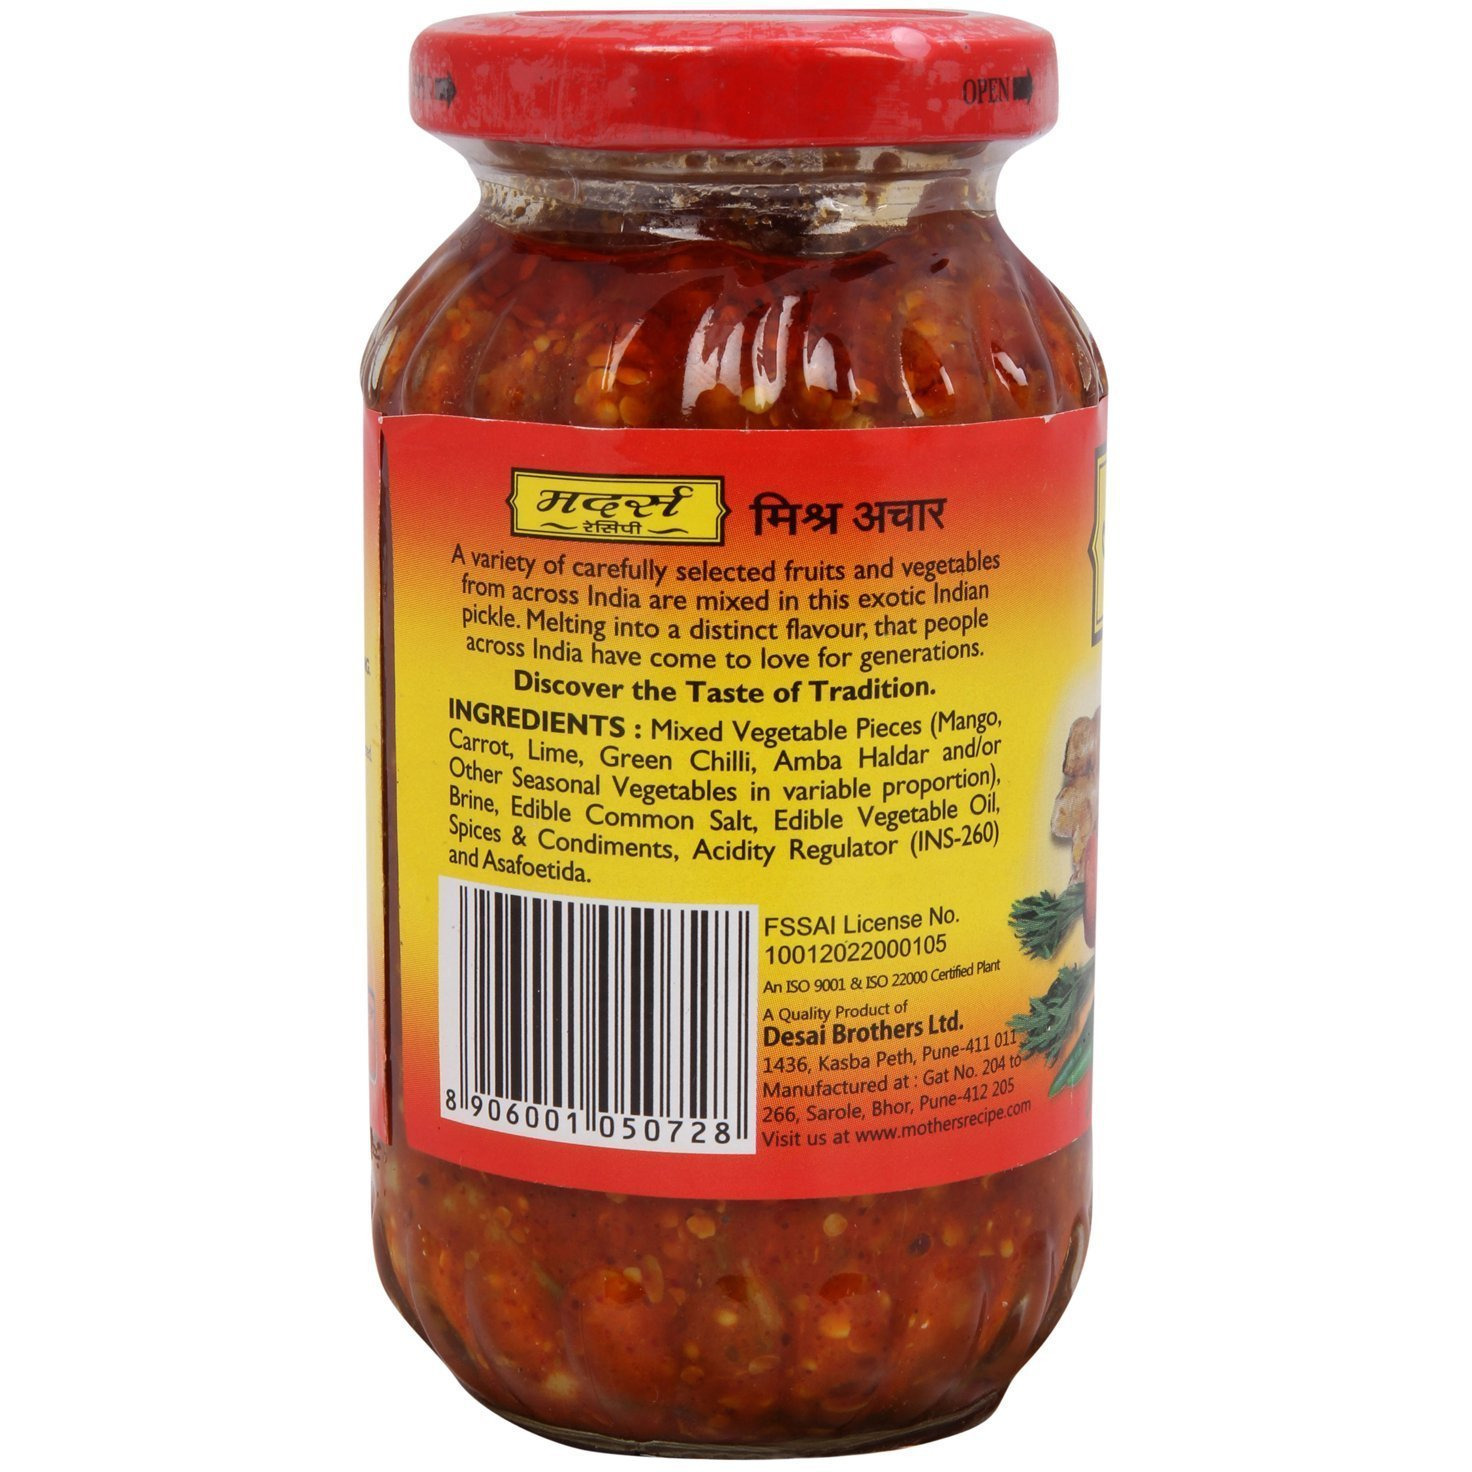 Mother's Recipe Mixed Pickle South Indian Style - 300 Gm (10.6 Oz) [Buy 1 Get 1 Free]